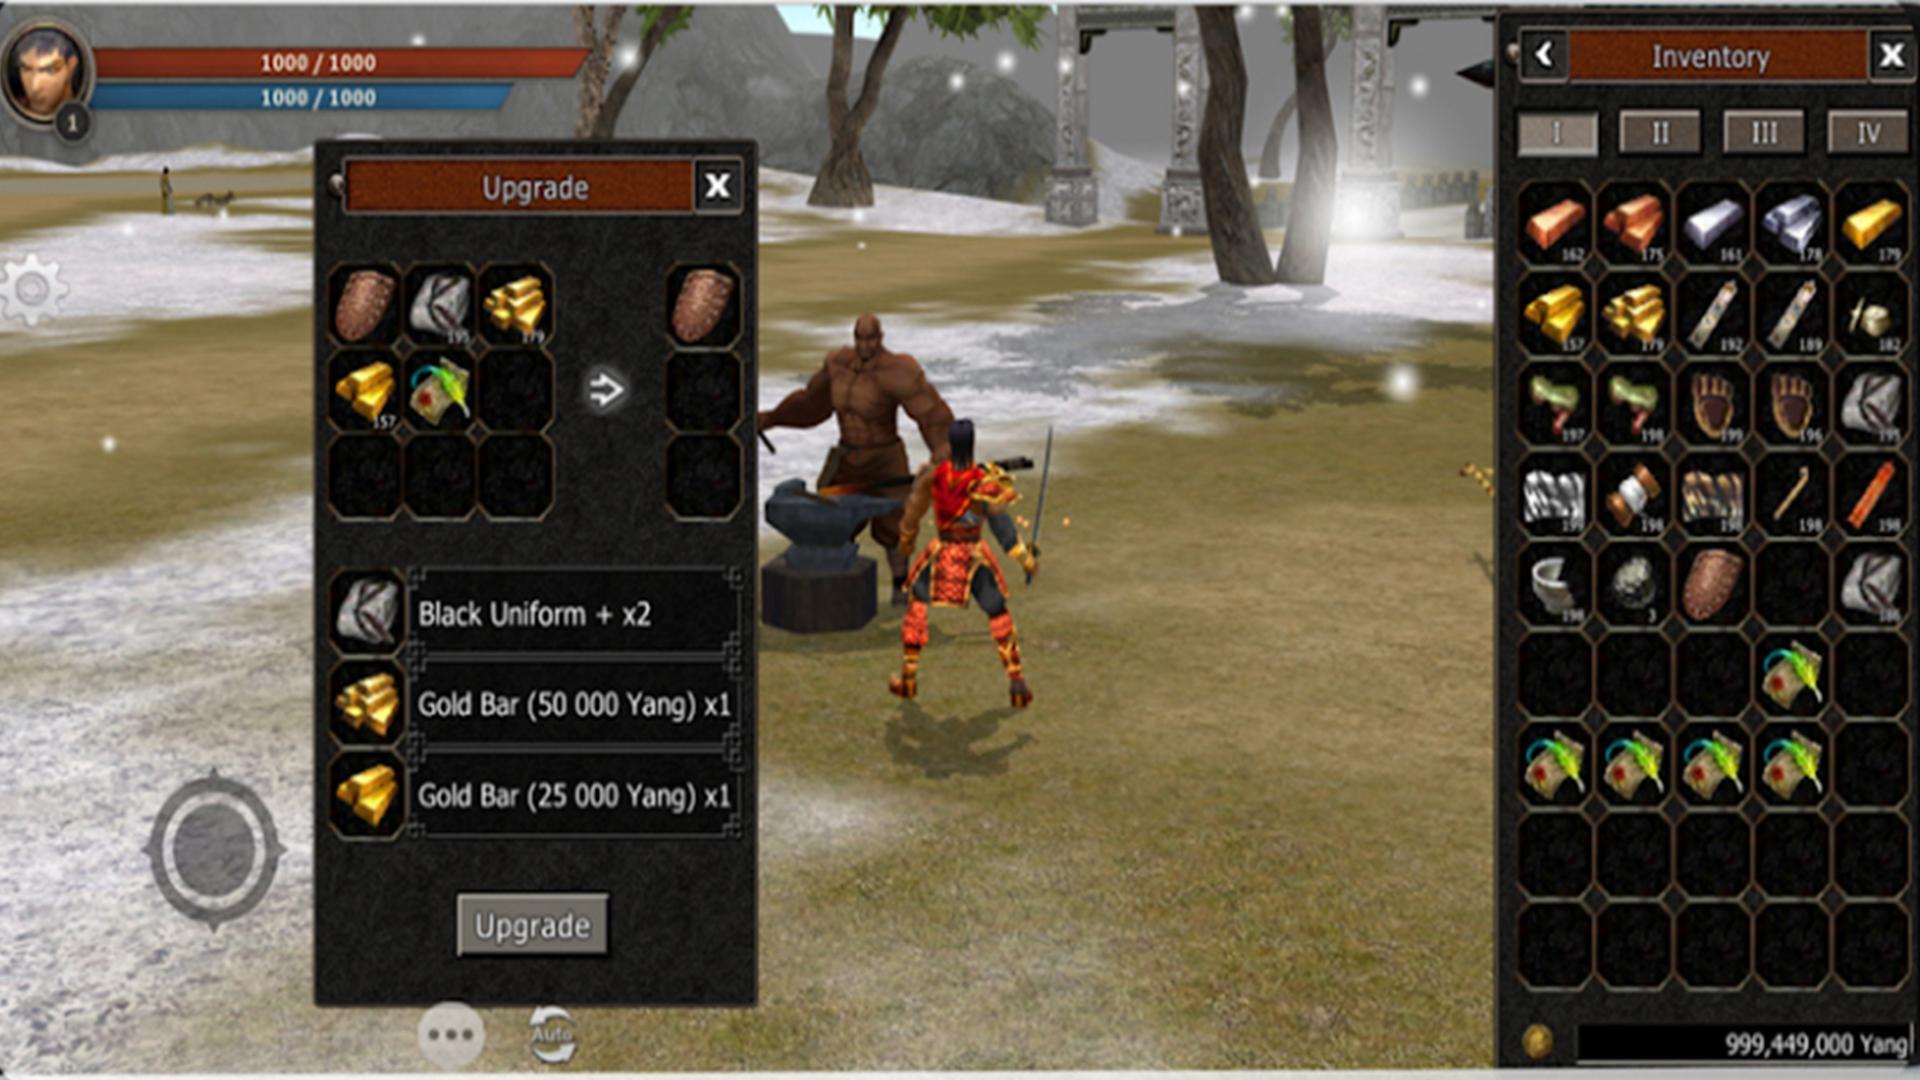 Metin 2 Mobile Game for Android - APK Download